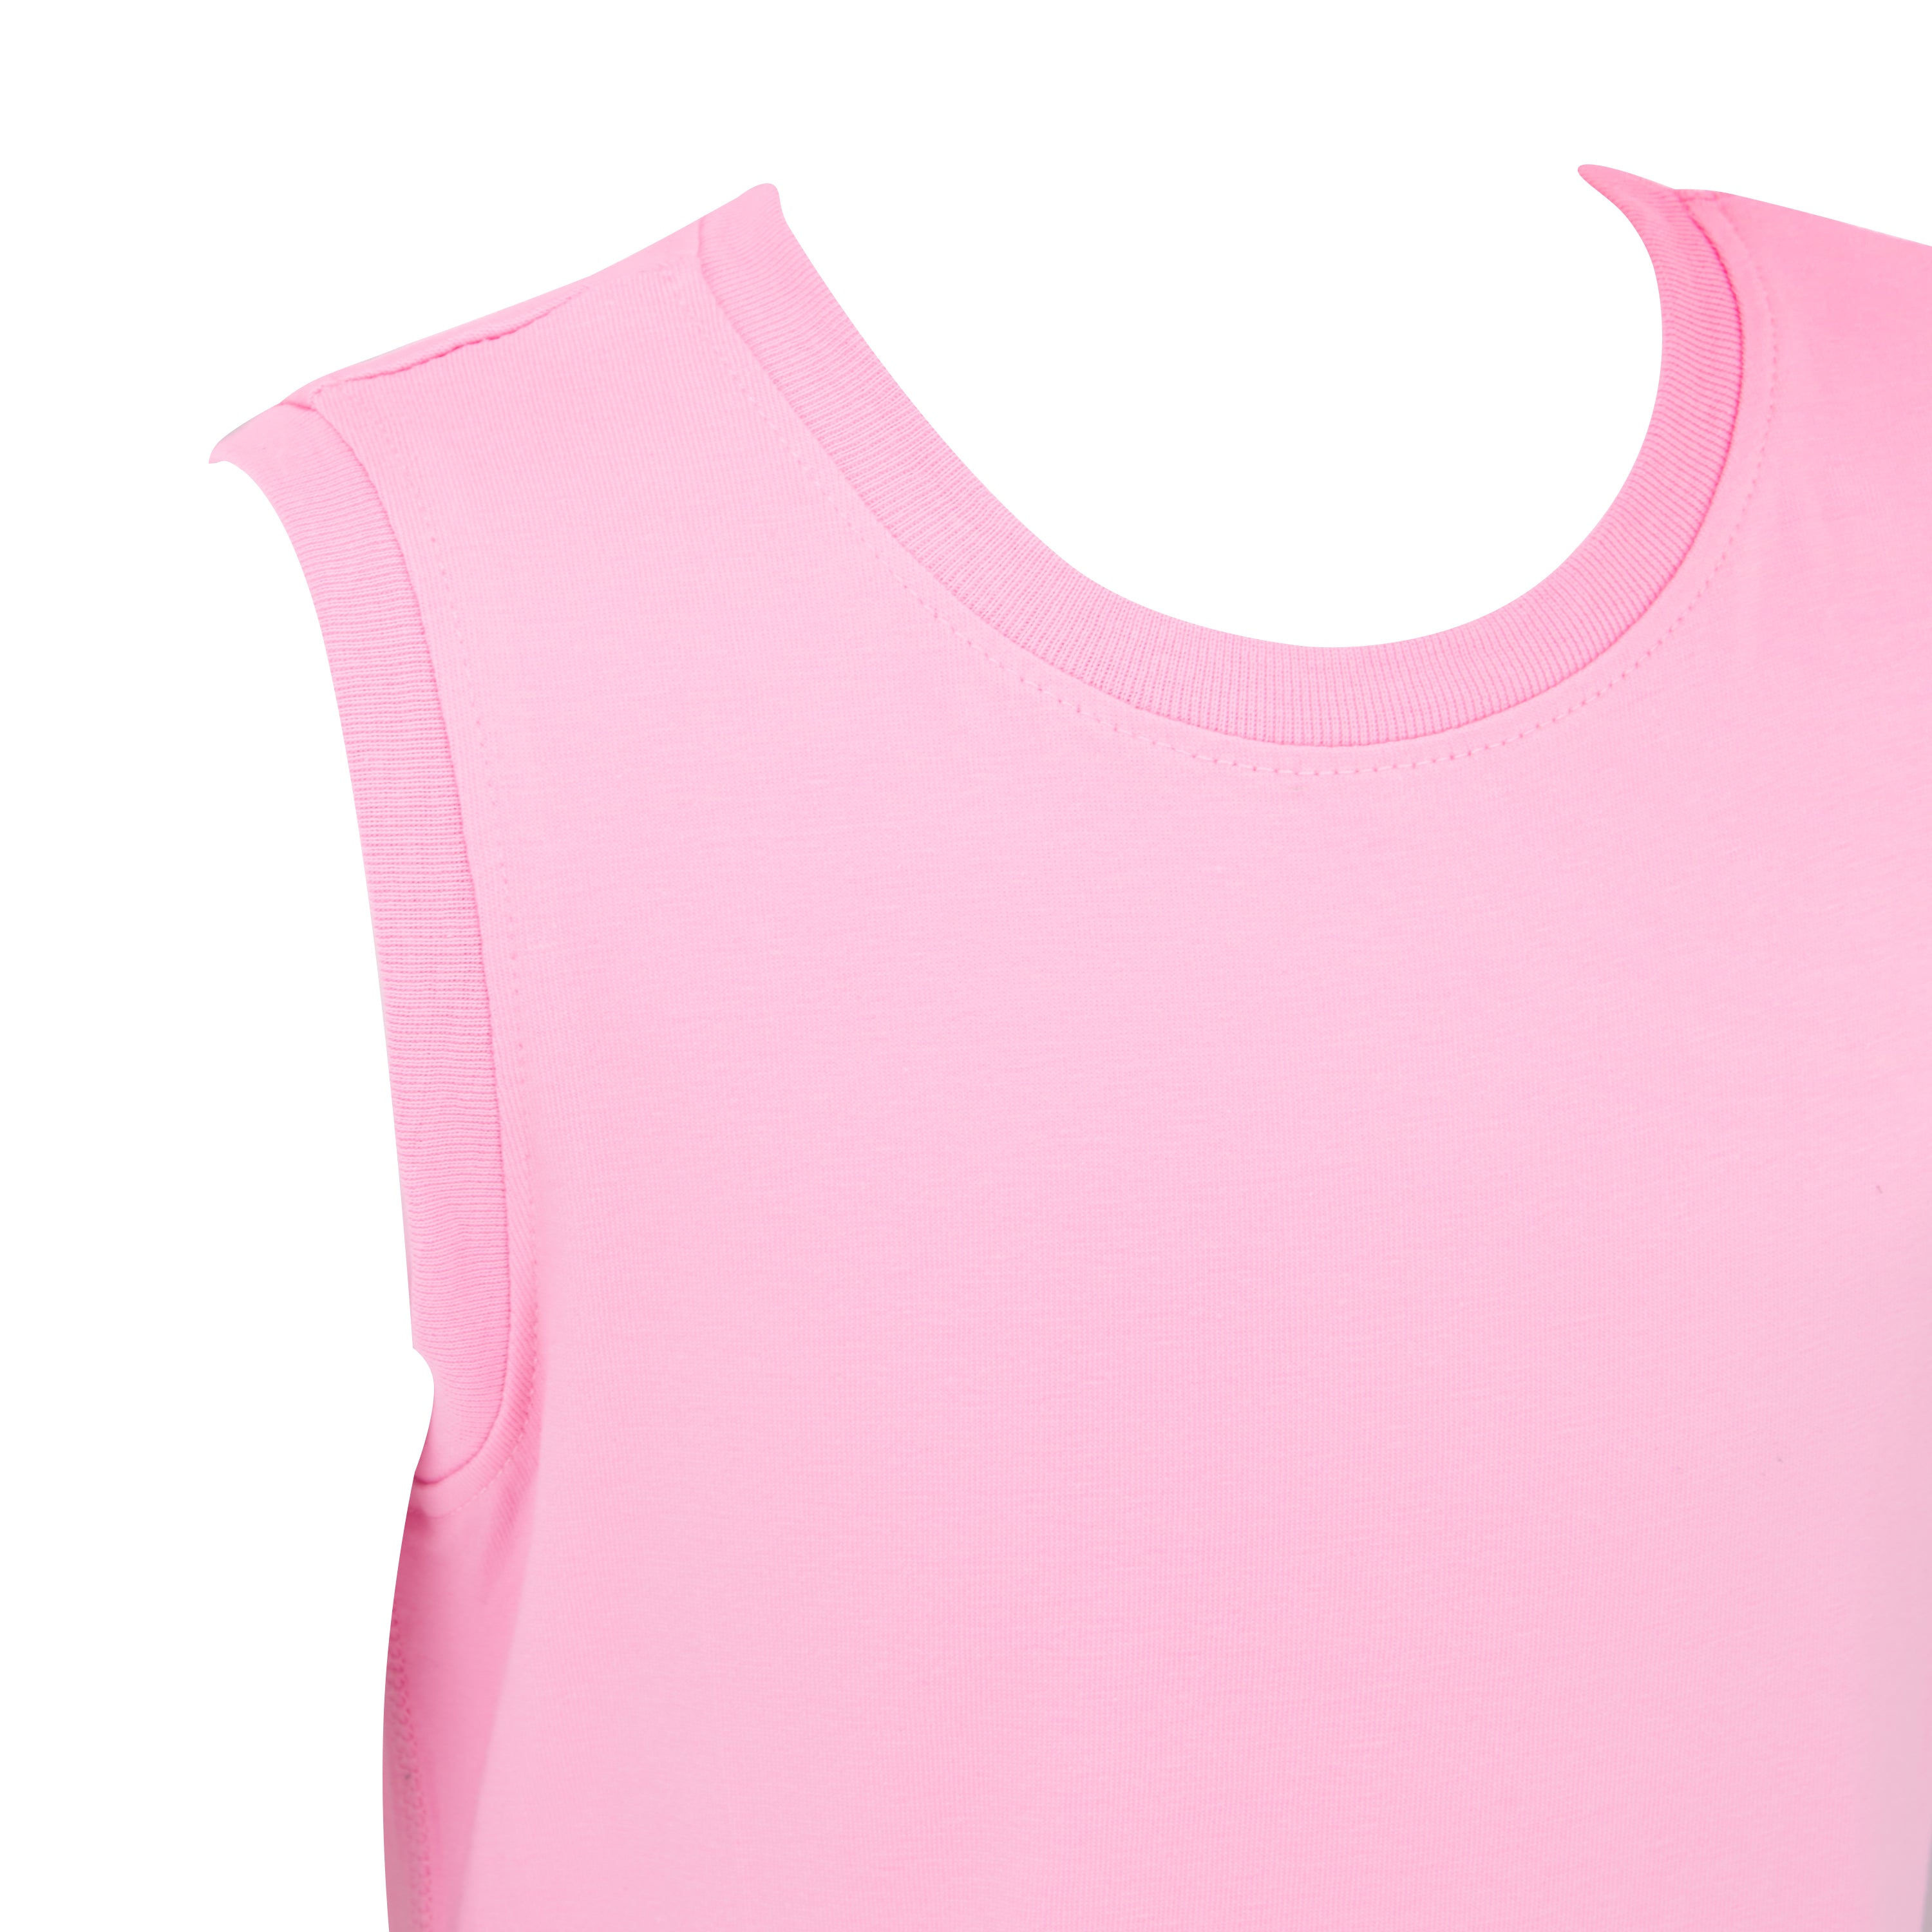 KayCey®P Super Soft Bodysuits - Sleeveless with Tube Access - Adults